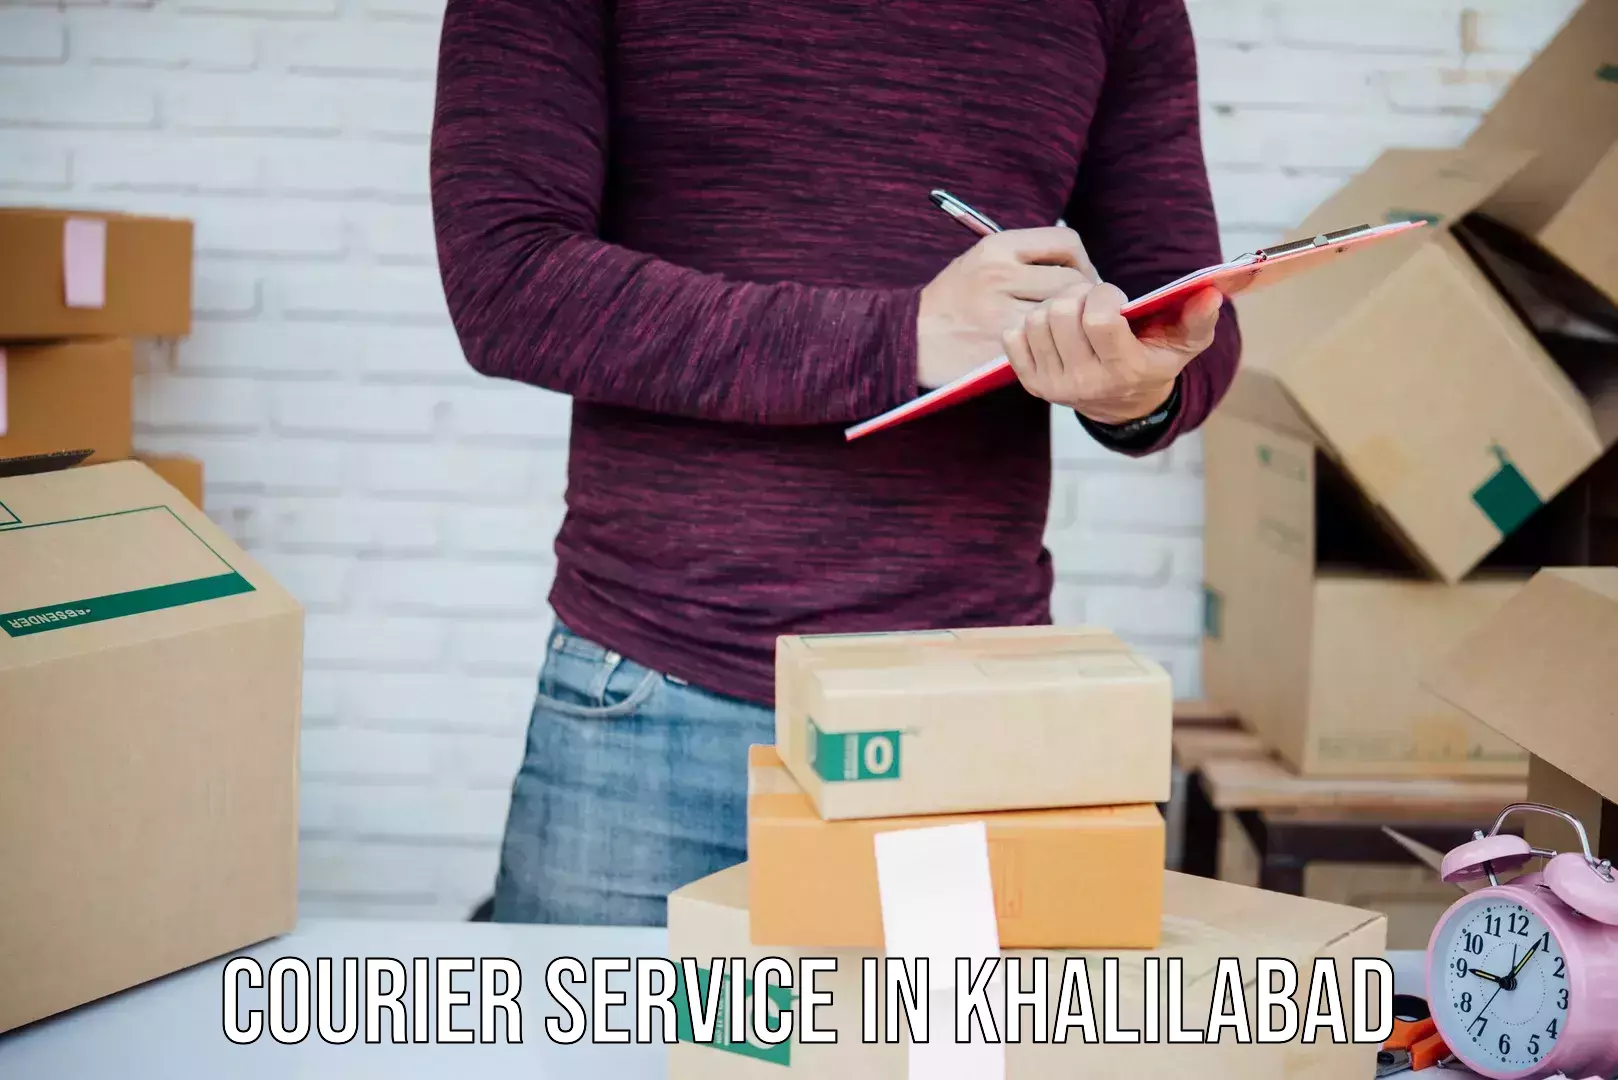 Express package services in Khalilabad